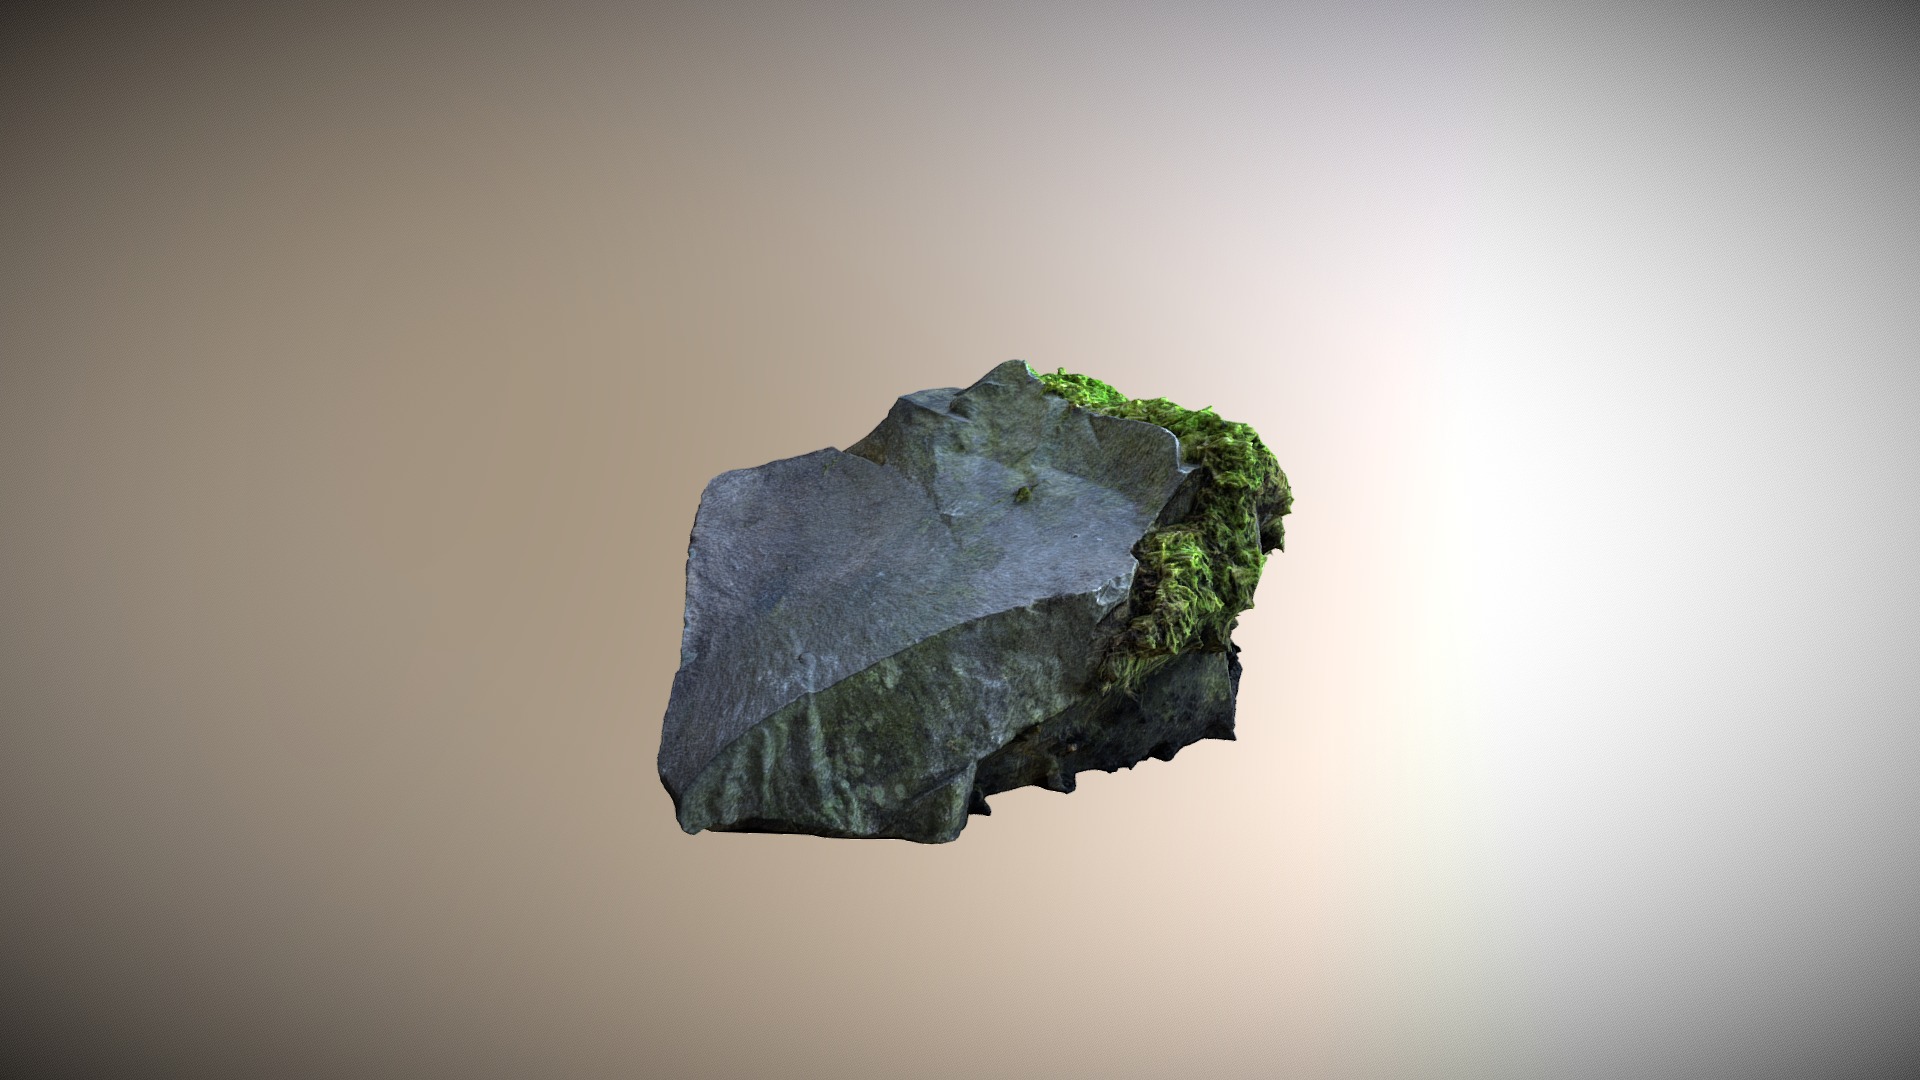 3D model Mossy Rock - This is a 3D model of the Mossy Rock. The 3D model is about a green rock on a white background.